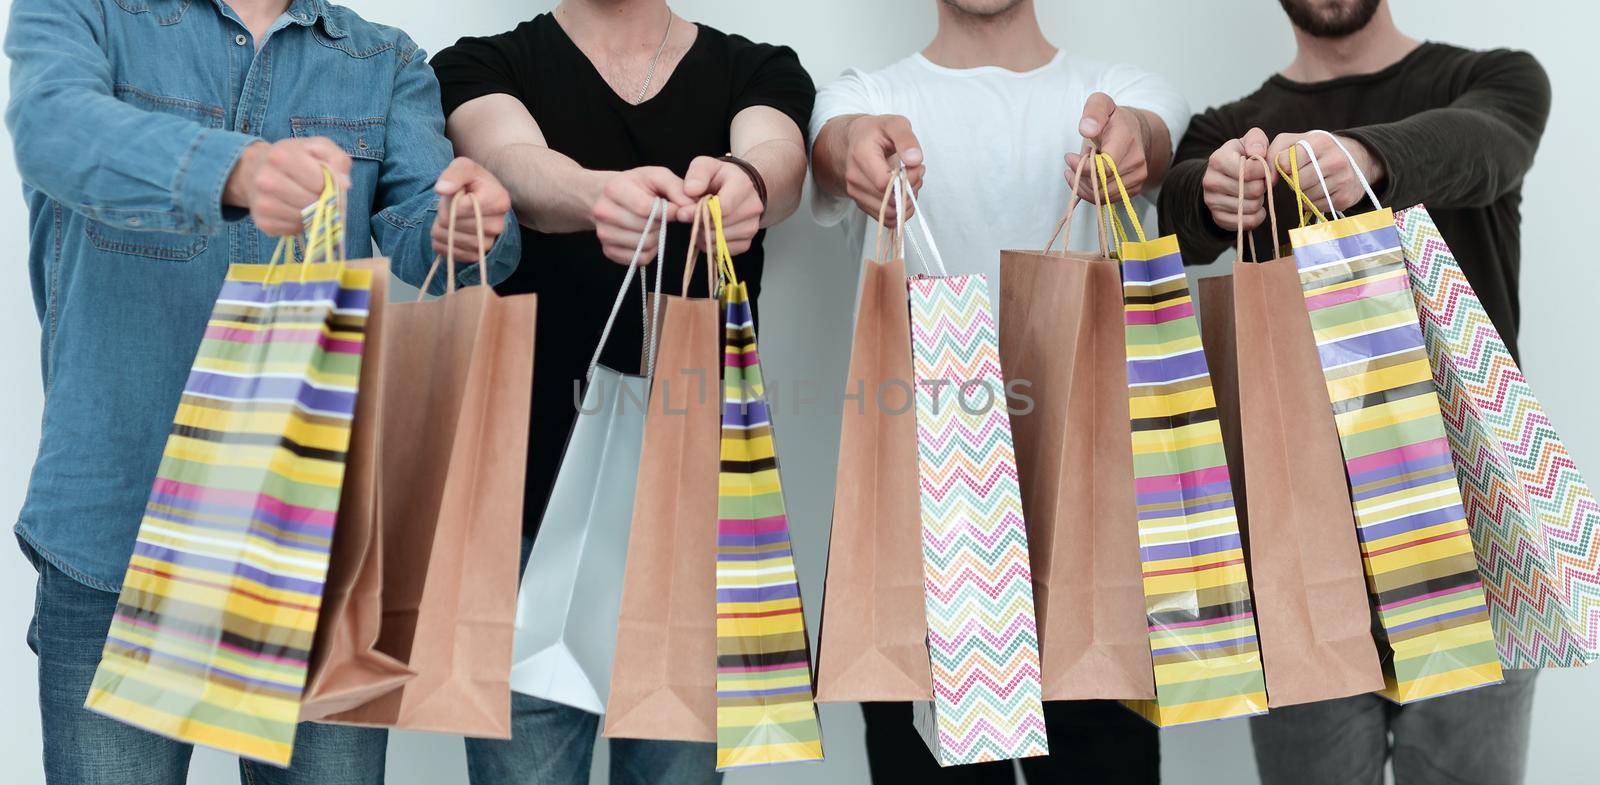 close up.group of students with shopping bags by asdf